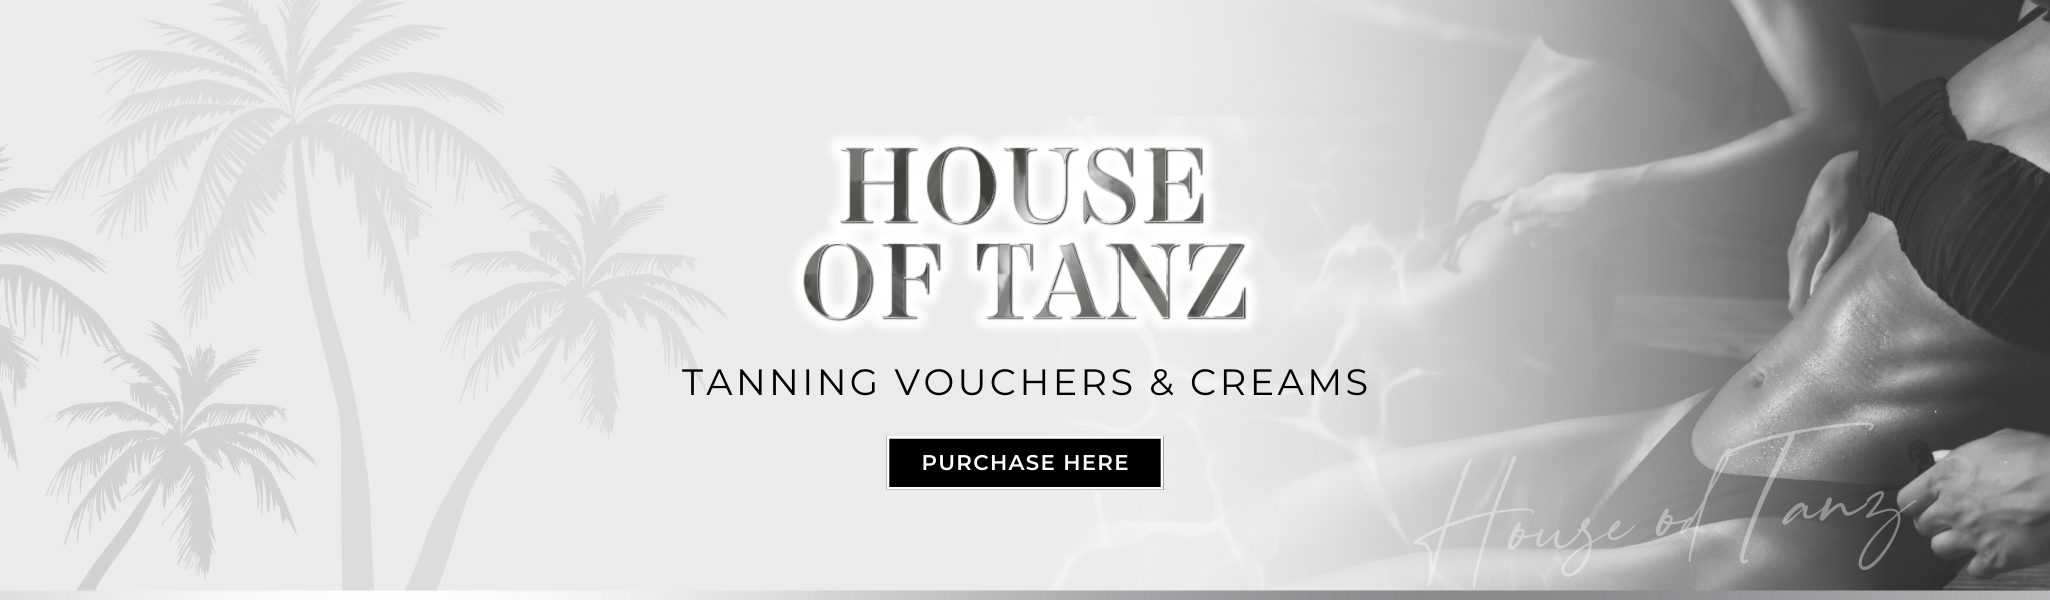 House Of Tanz Homepage Top Banner